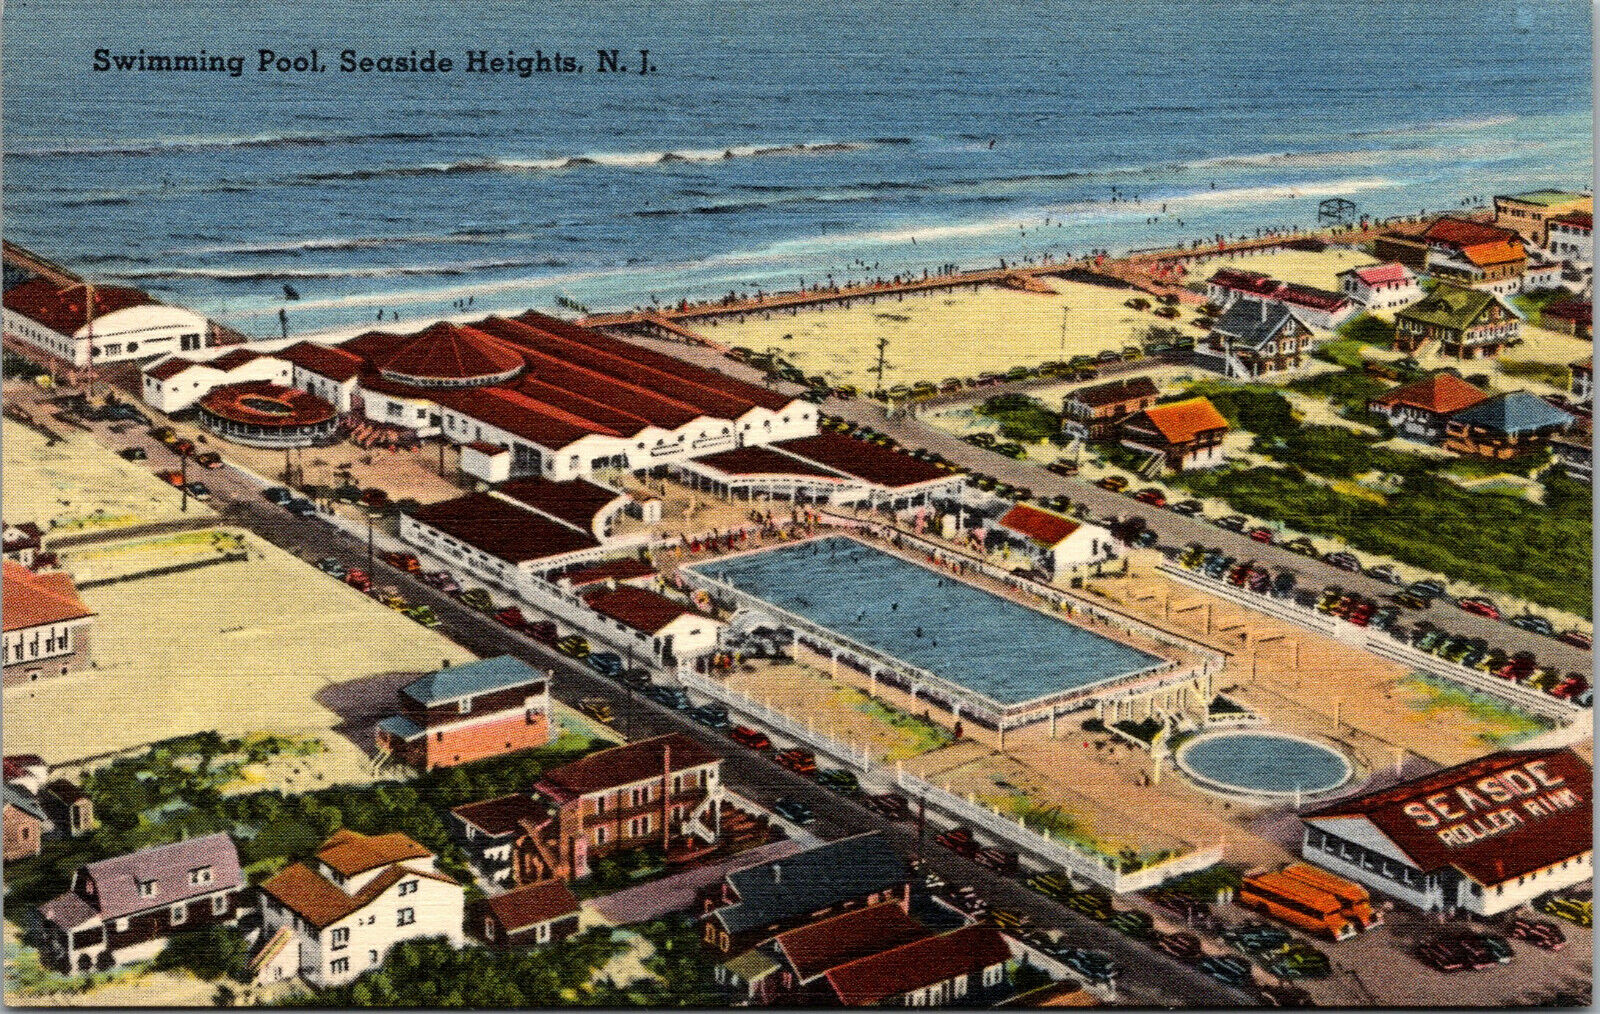 Vtg 1930s Swimming Pool Aerial View Seaside Heights New Jersey NJ Linen Postcard